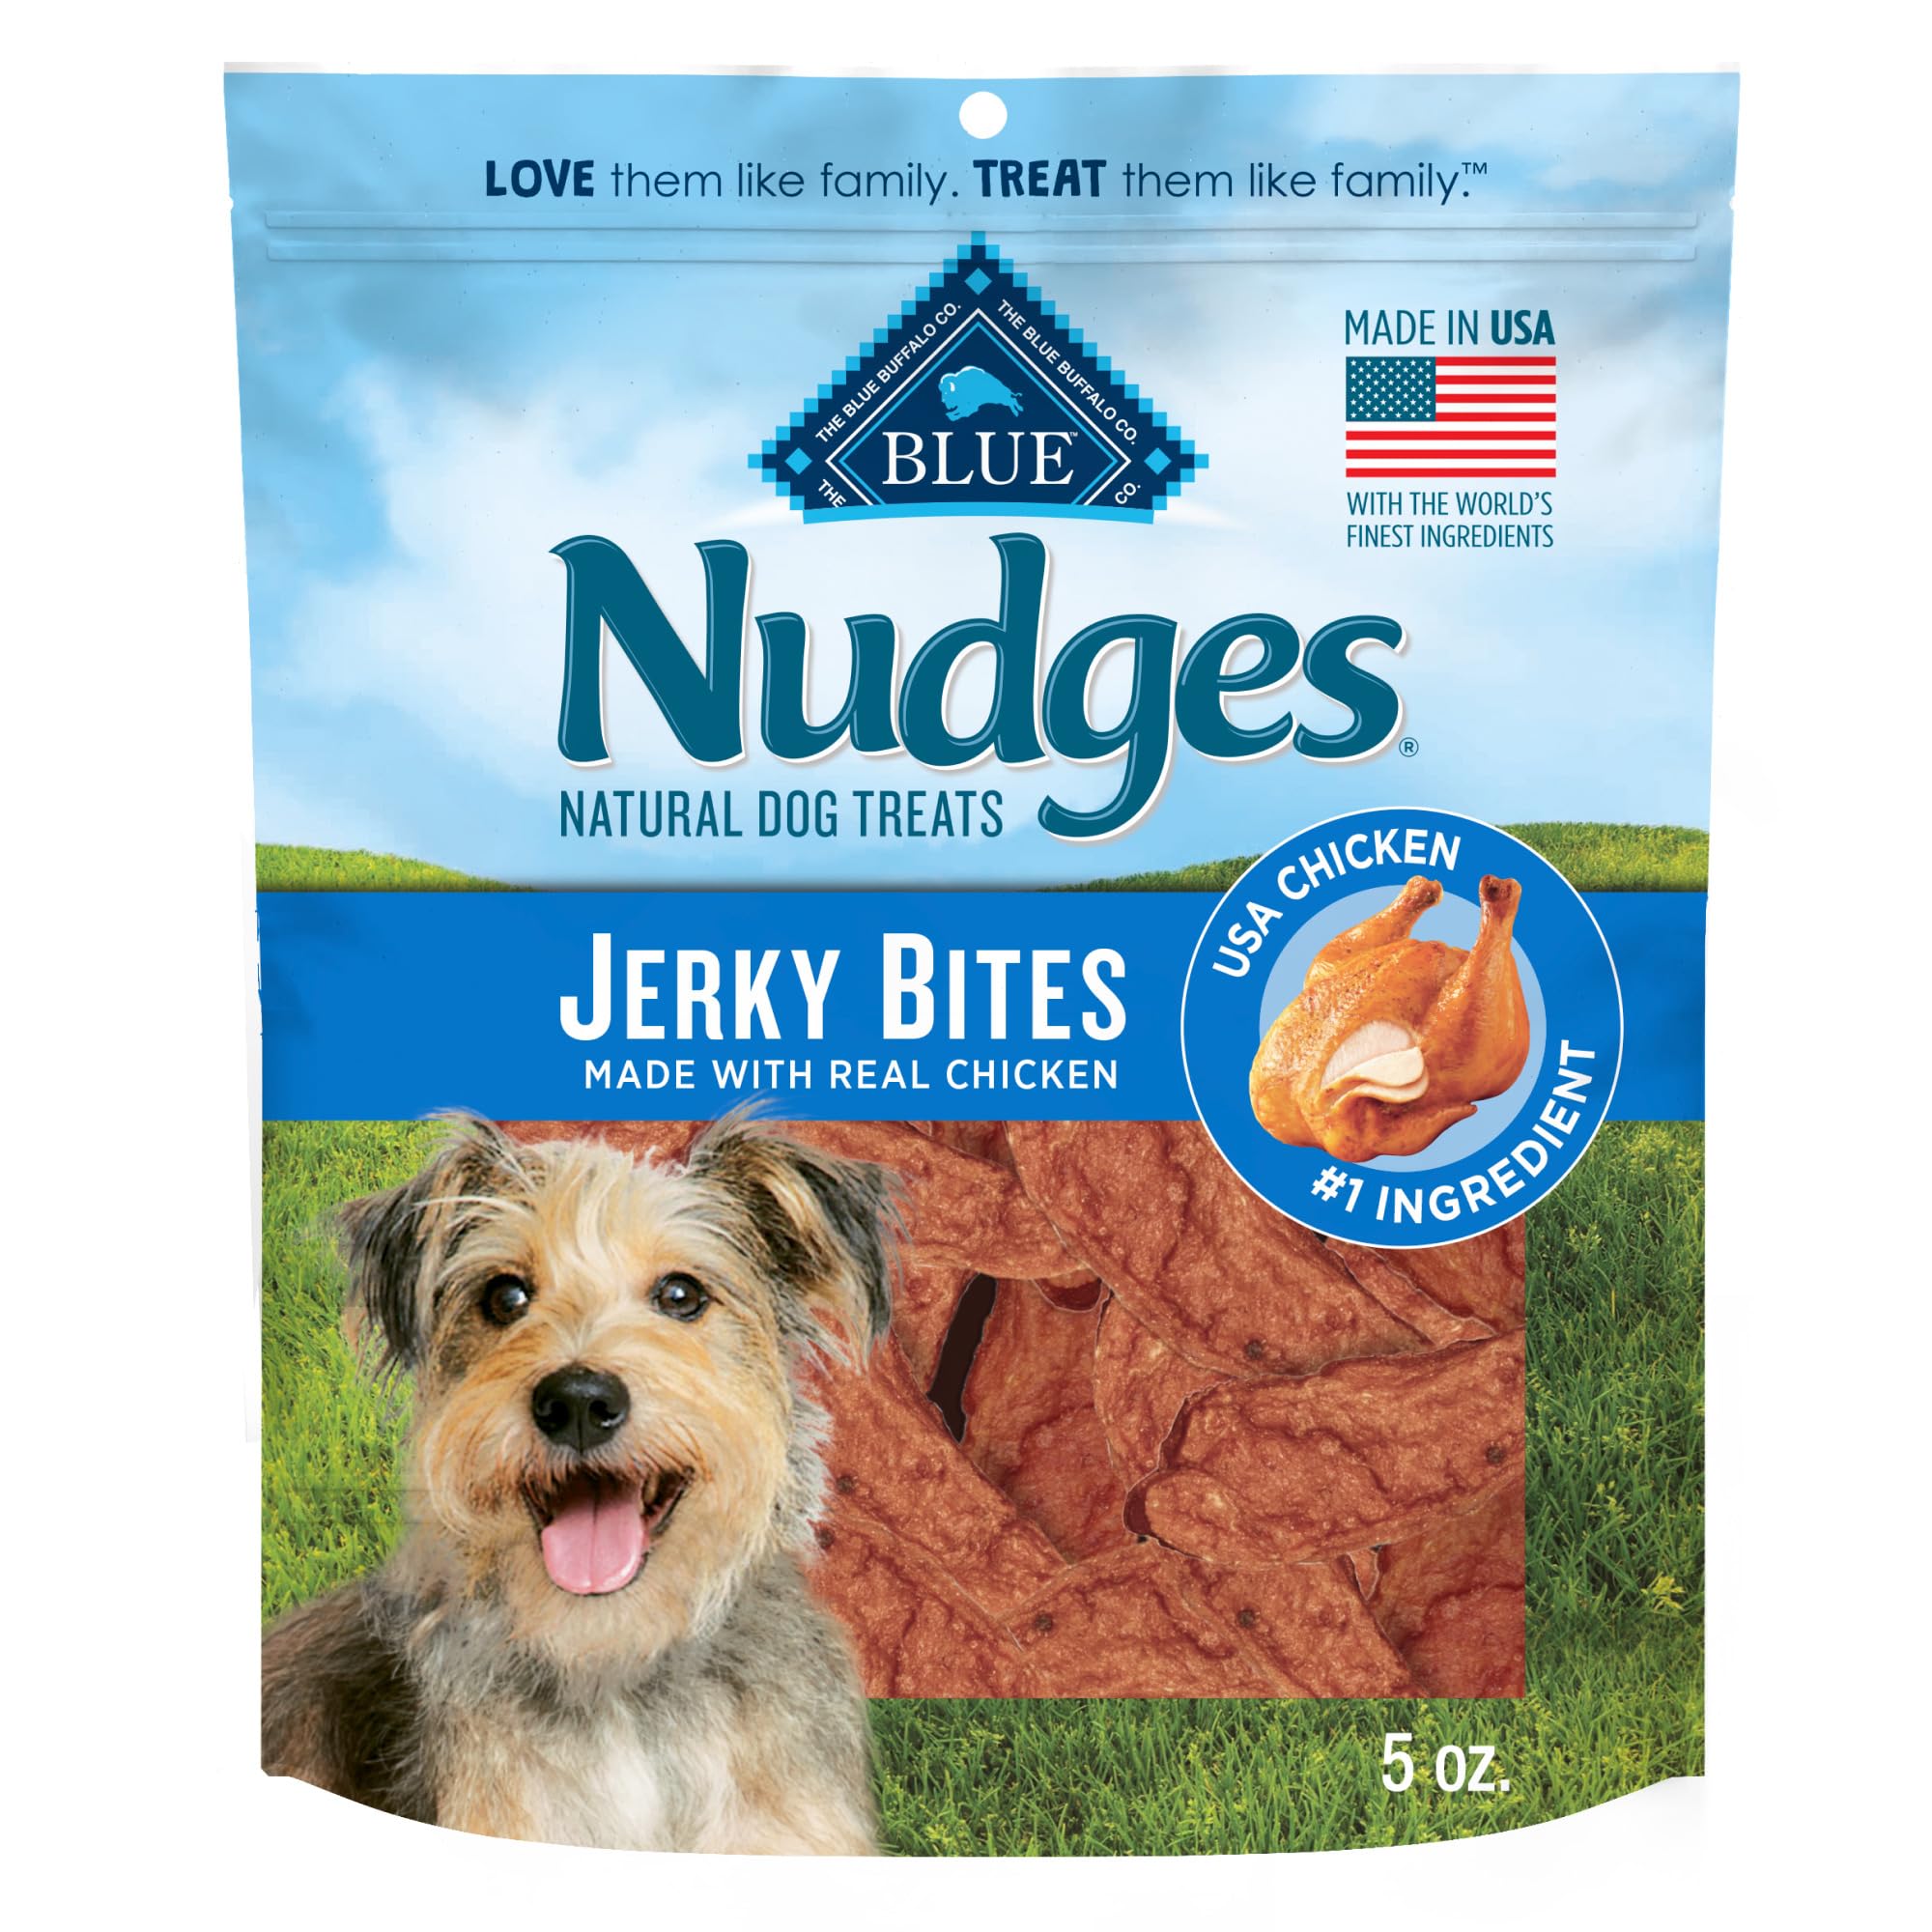 5-Oz Blue Buffalo Nudges Chicken Jerky Bites Dog Treats $4.17 w/ S&S + Free Shipping w/ Prime or on $35+